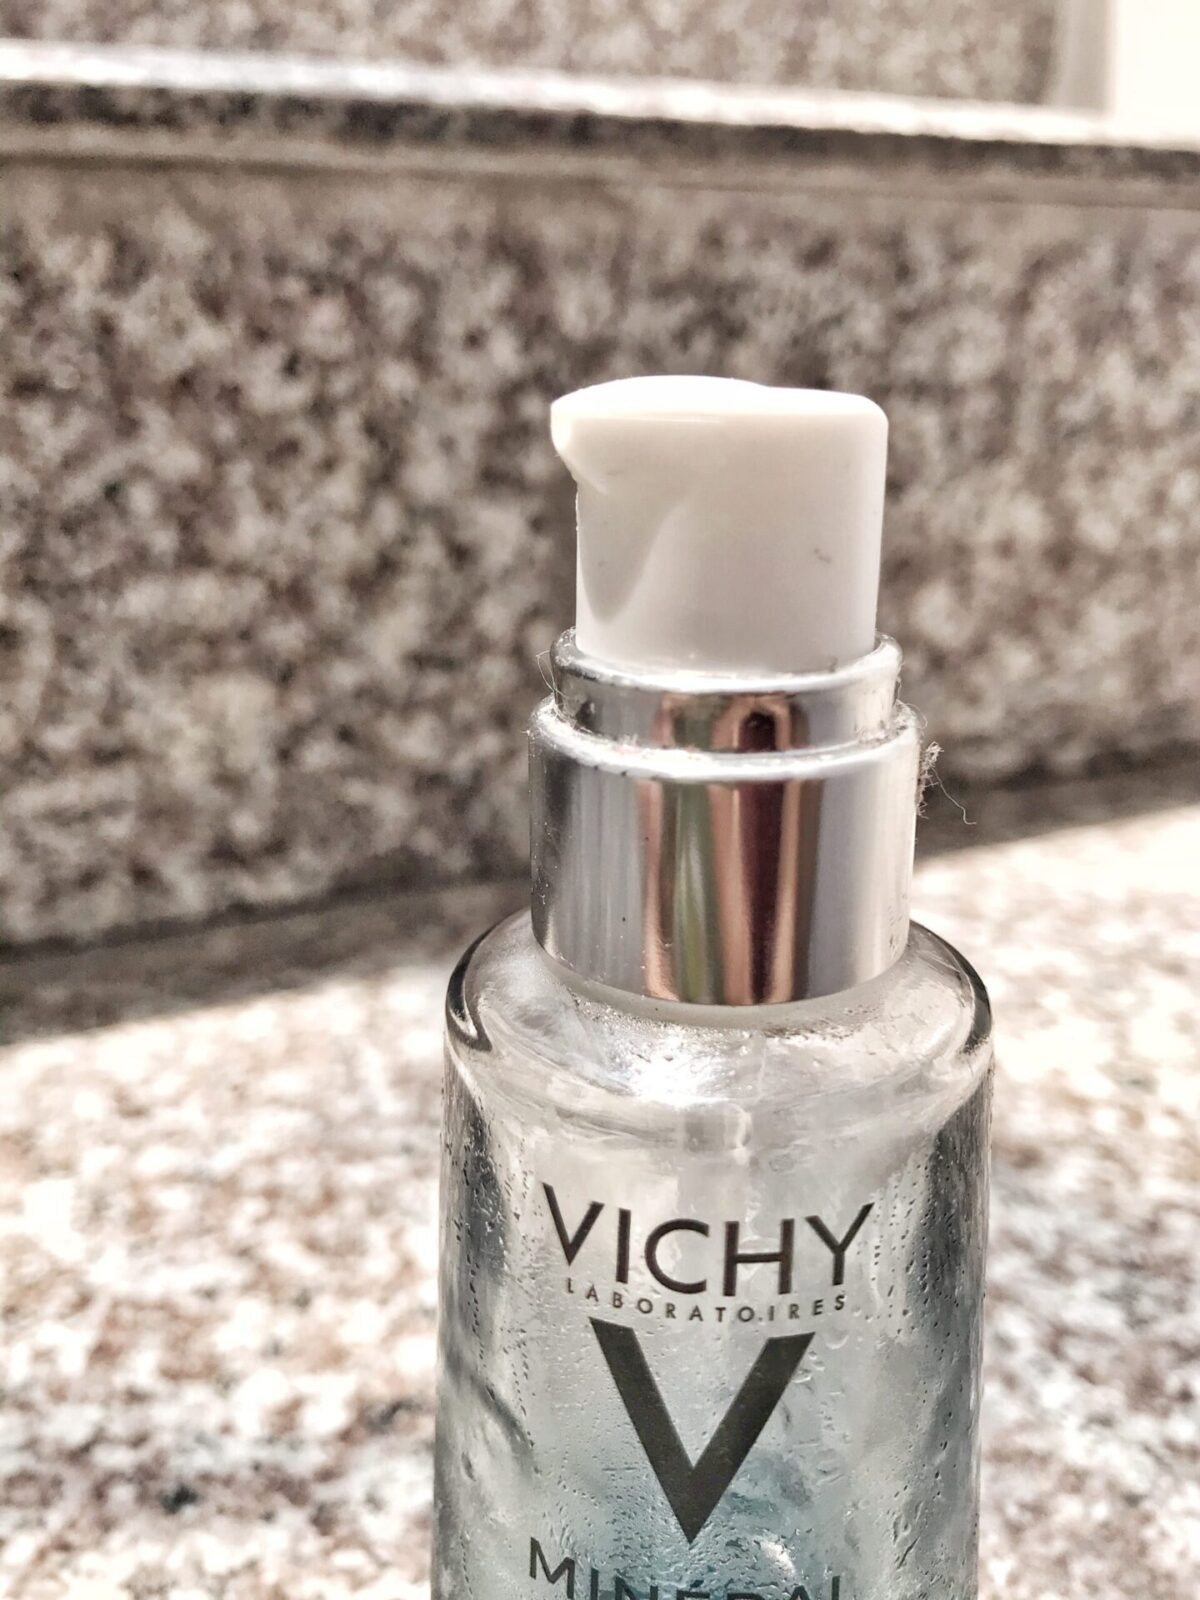 Review Dưỡng Chất Vichy Mineral 89 Booster 30